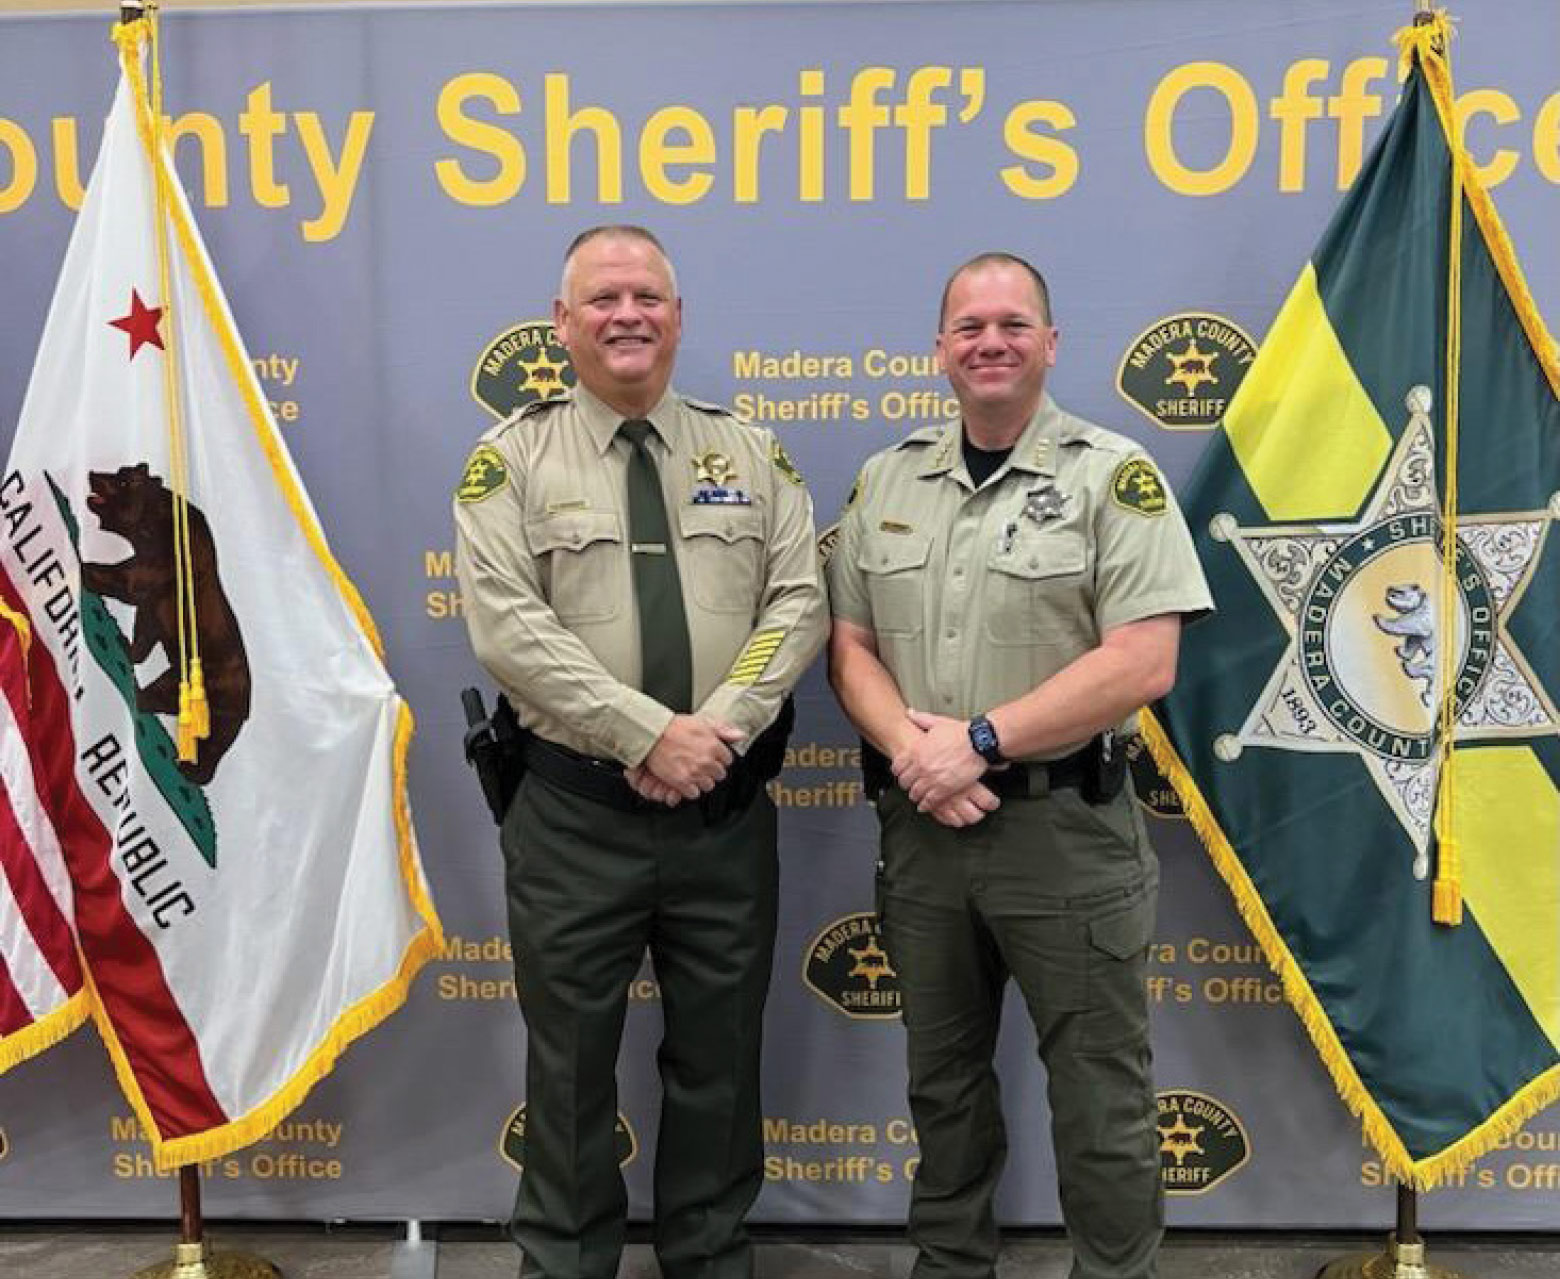 retired-lapd-reserve-jeff-nocket-joins-madera-county-sheriffs-office-1